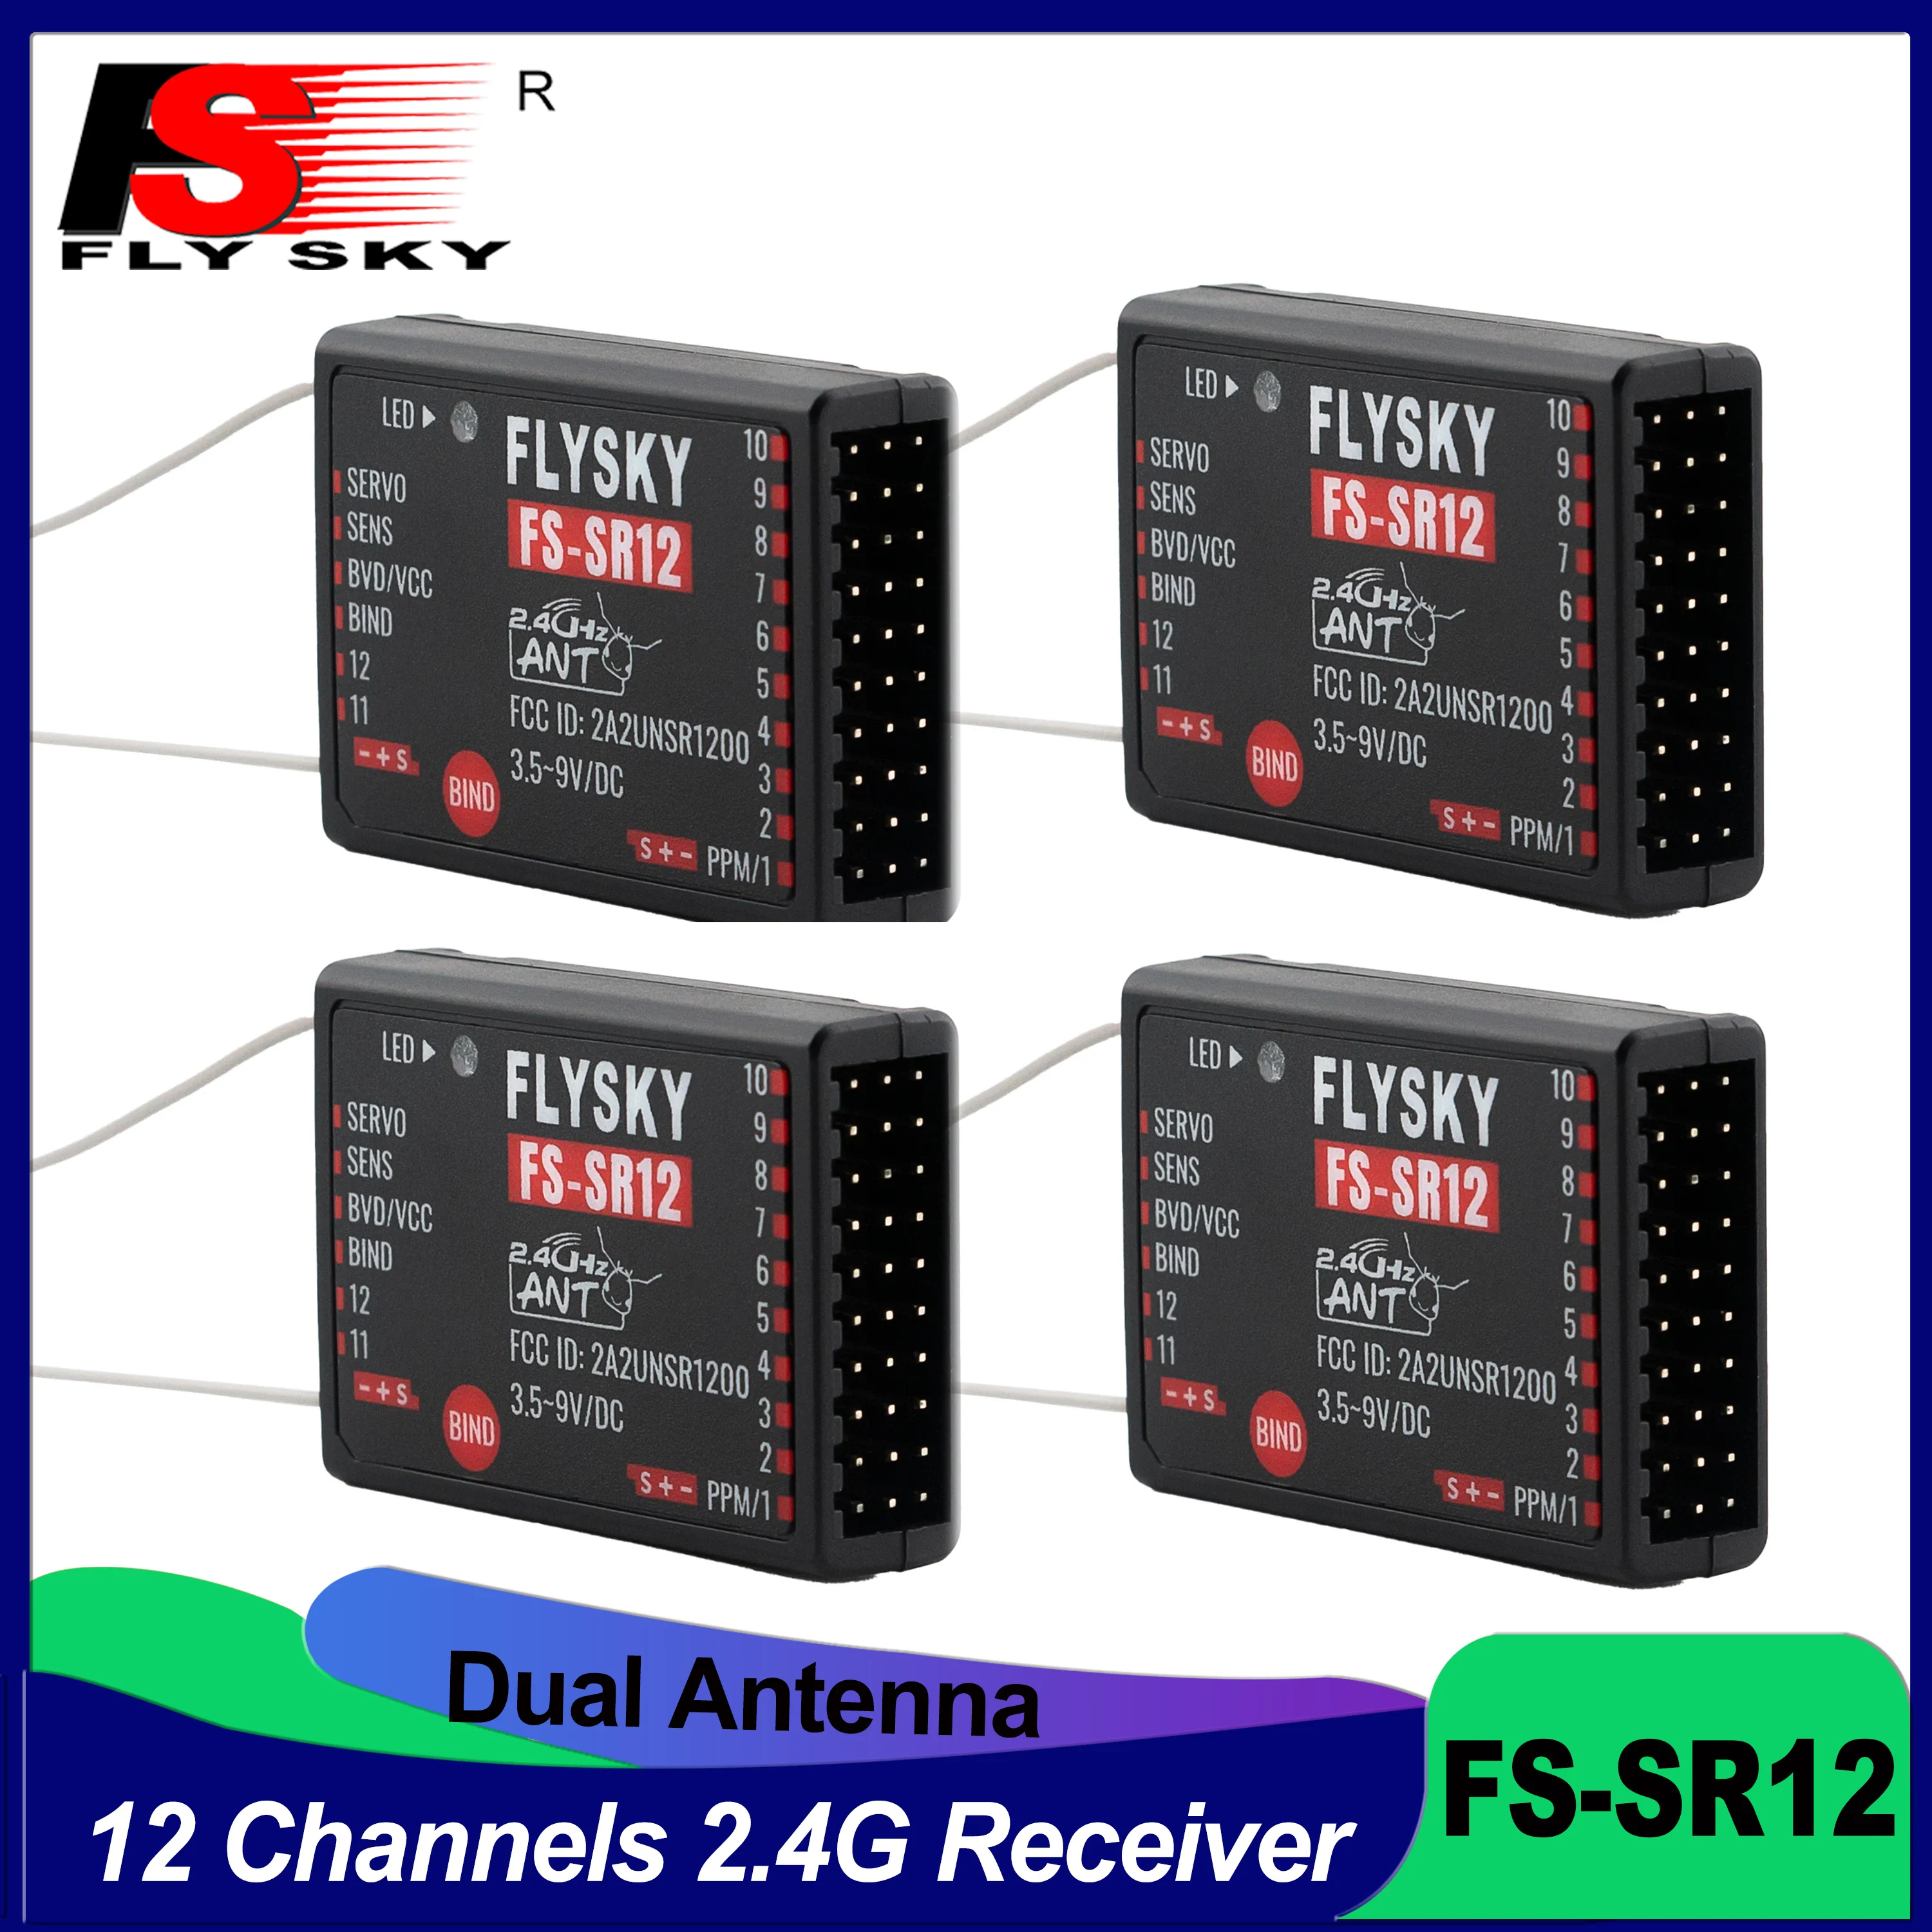 

FLYSKY FS-SR12 12CH 2.4G Receiver Dual Antenna for RC Fixed Wing Car Boat Robot Model Toy Protocol Transmitter FS-ST8